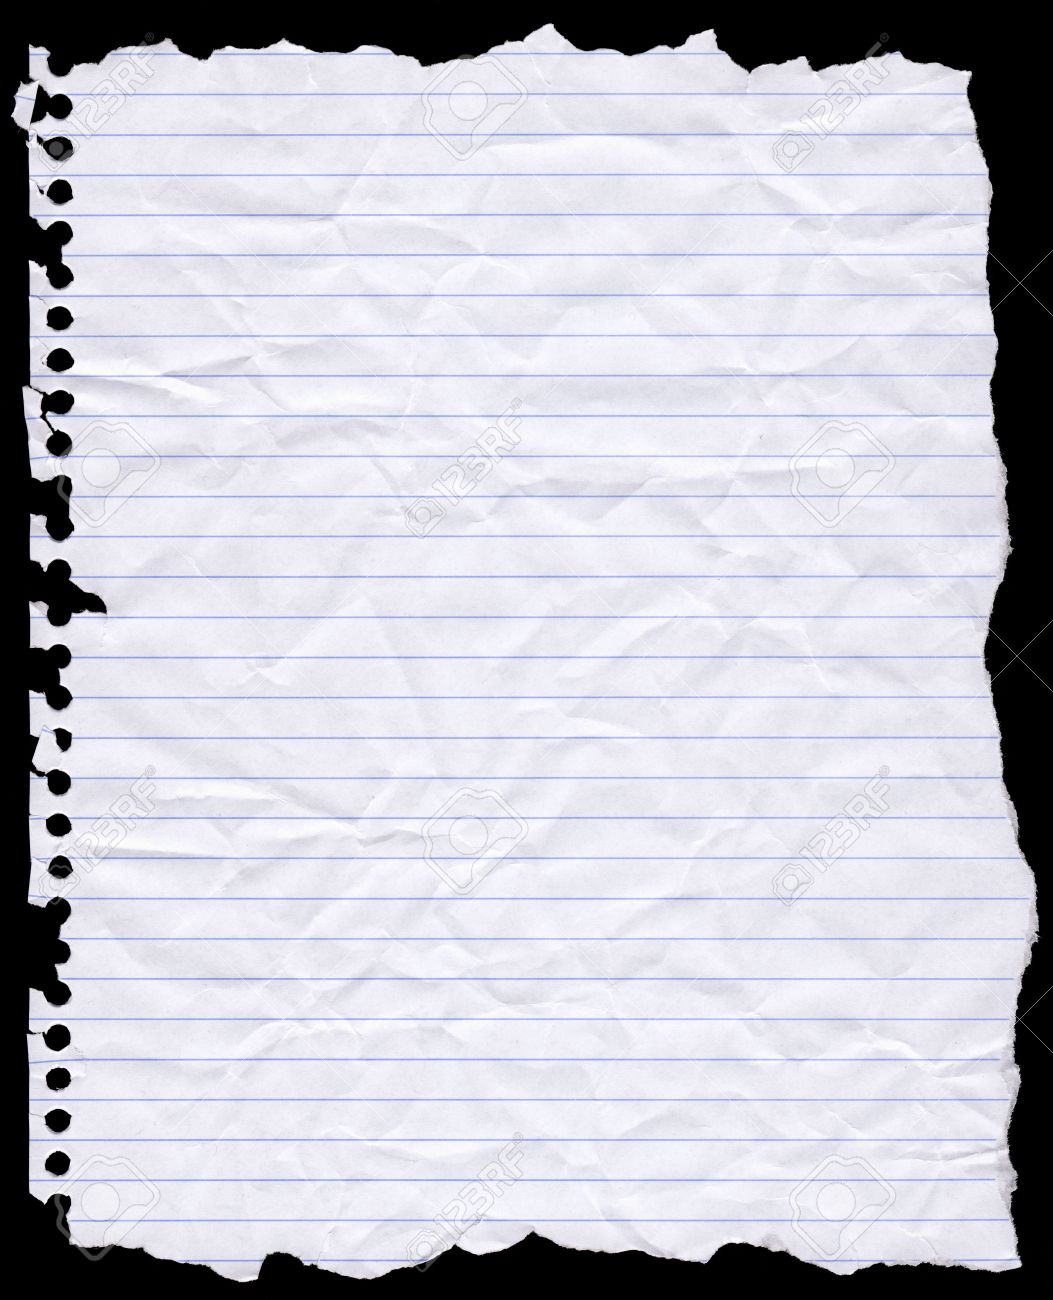 High Quality Old Notebook Paper Blank Meme Template